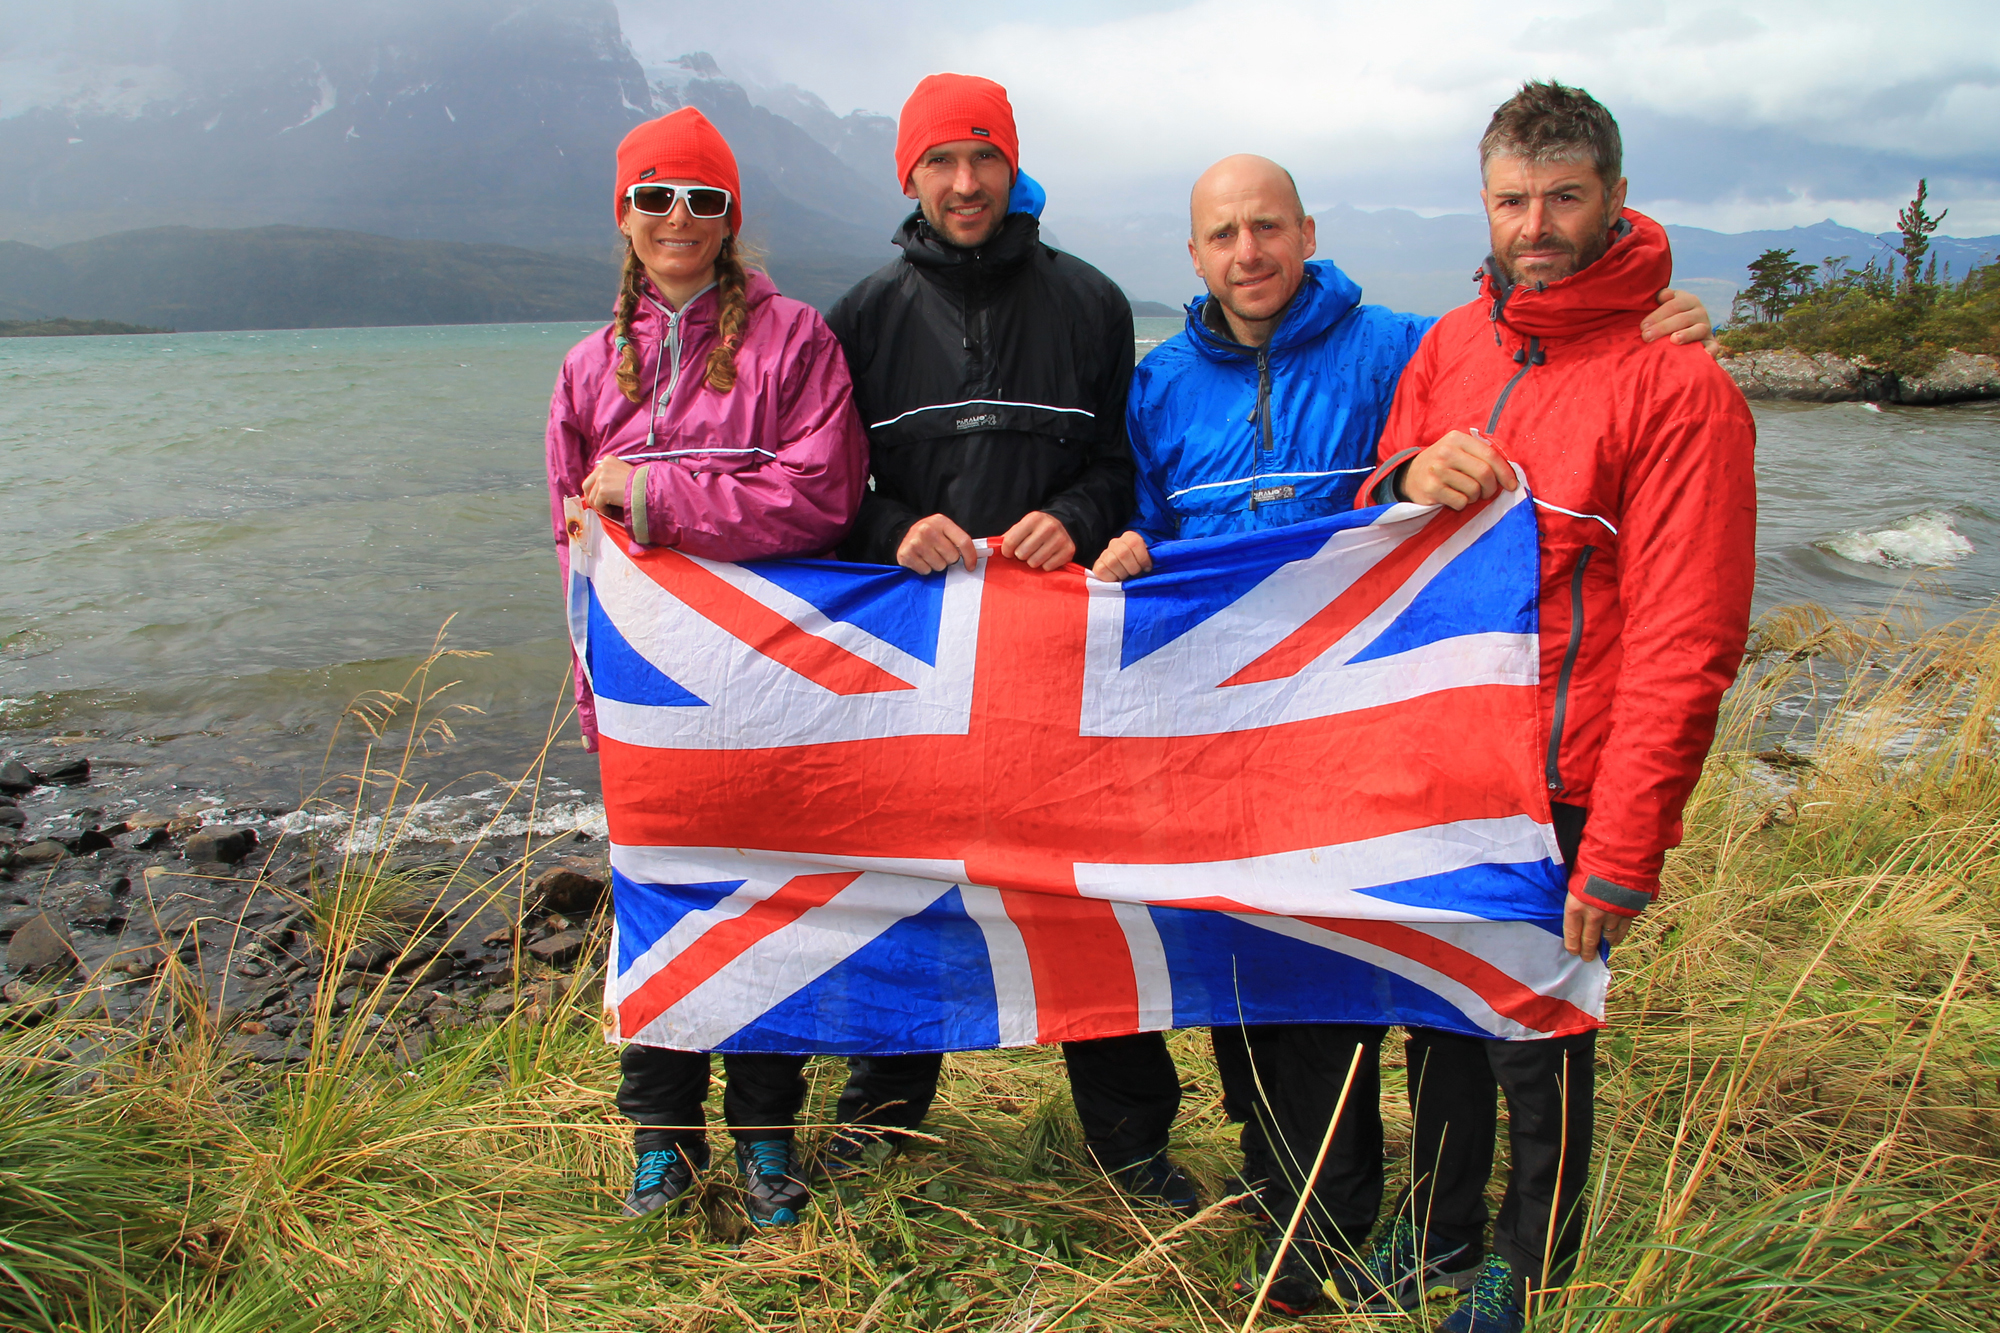 The winners of the Patagonian Expedition Race; Godzone Adventure 